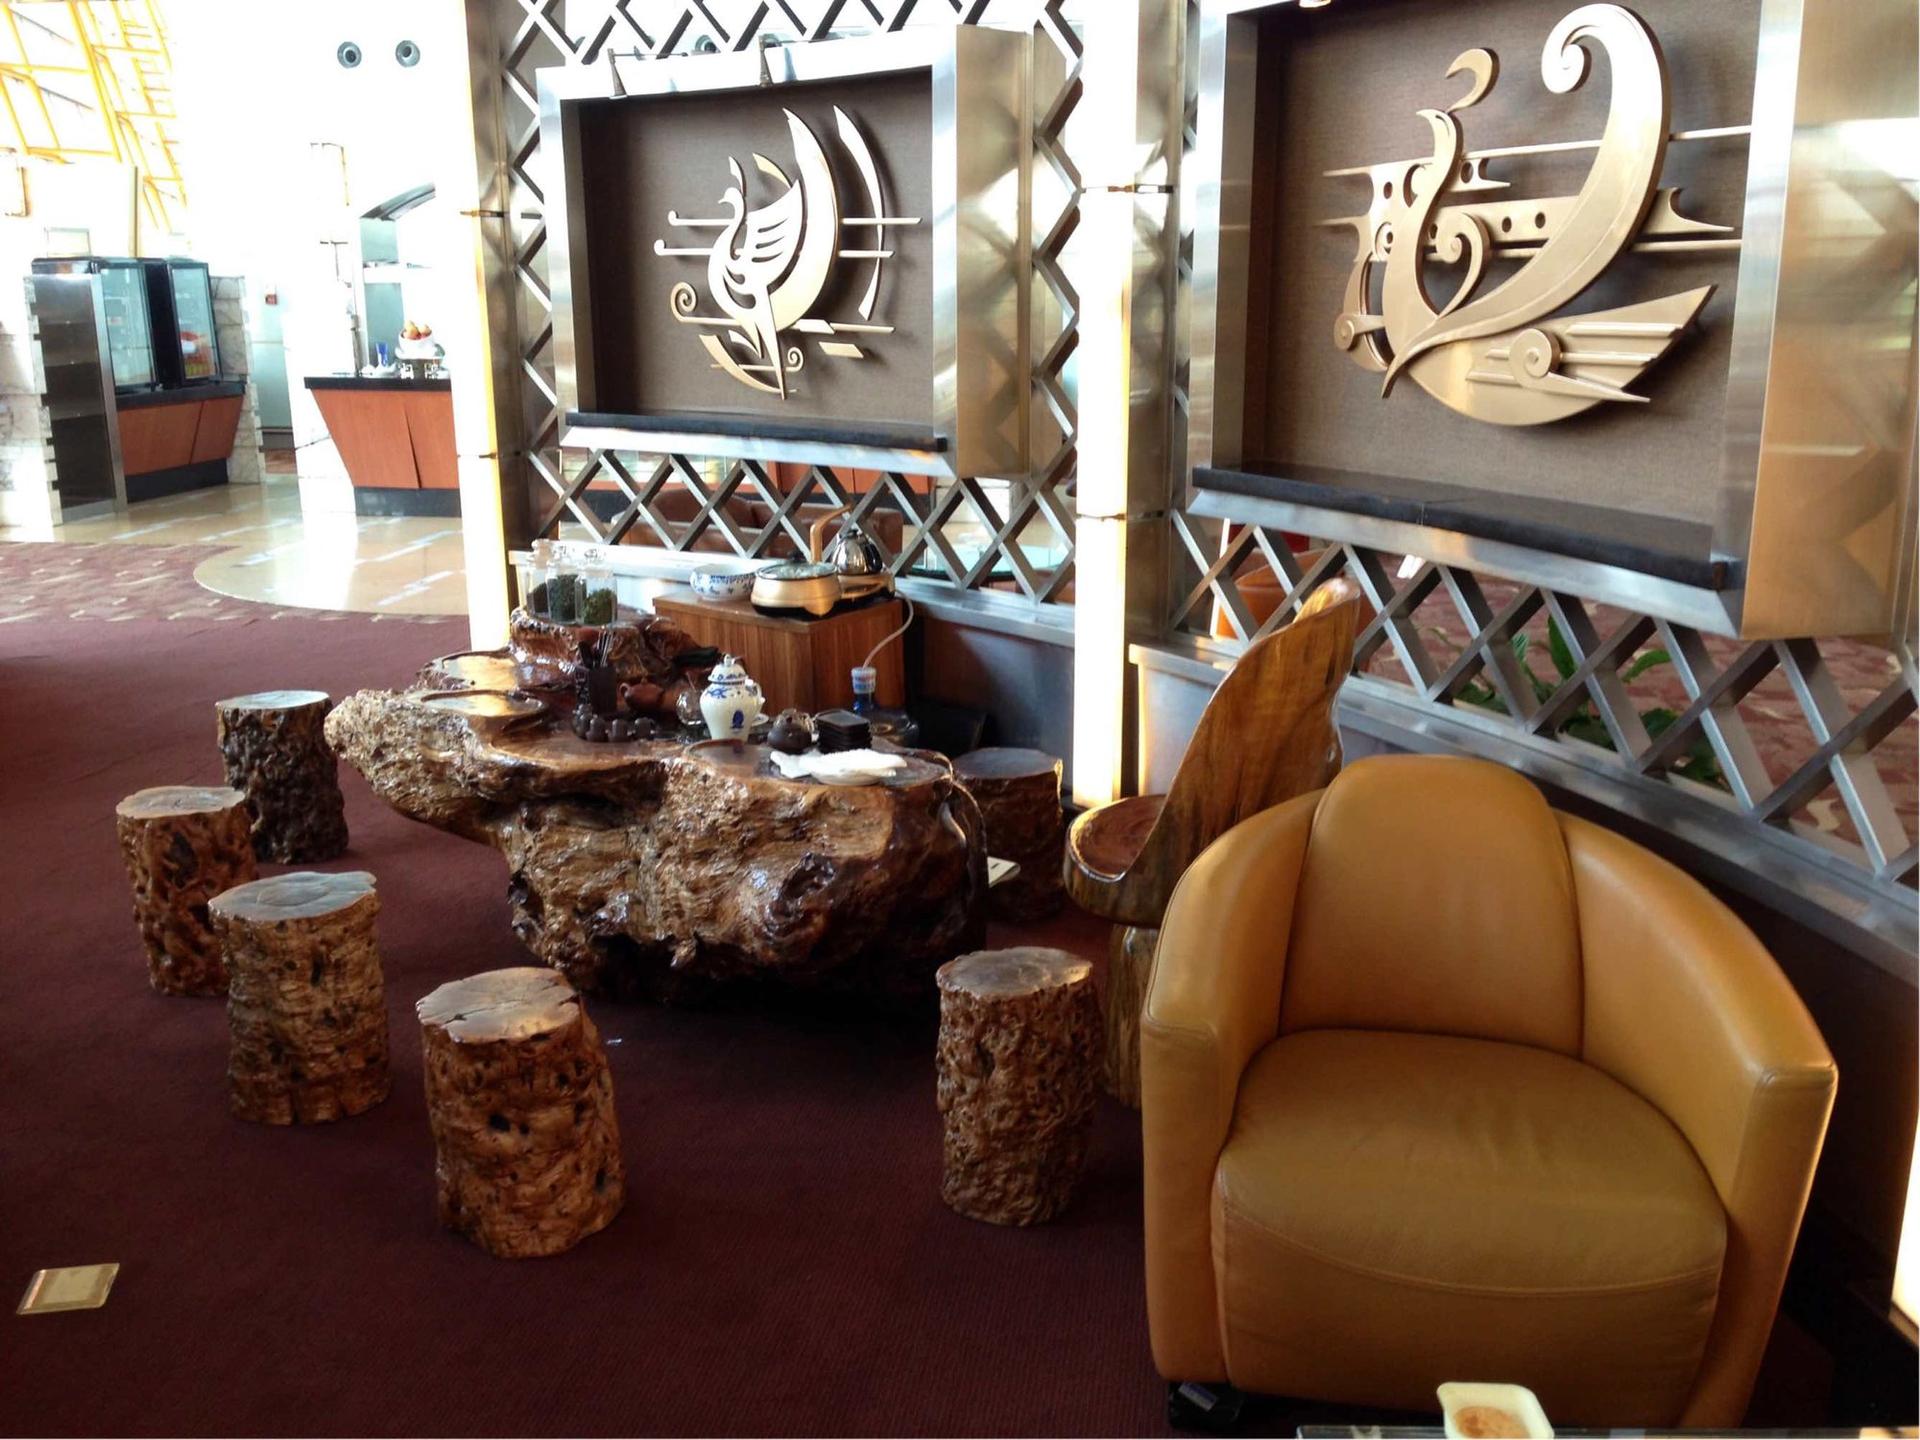 Air China International First Class Lounge image 19 of 38